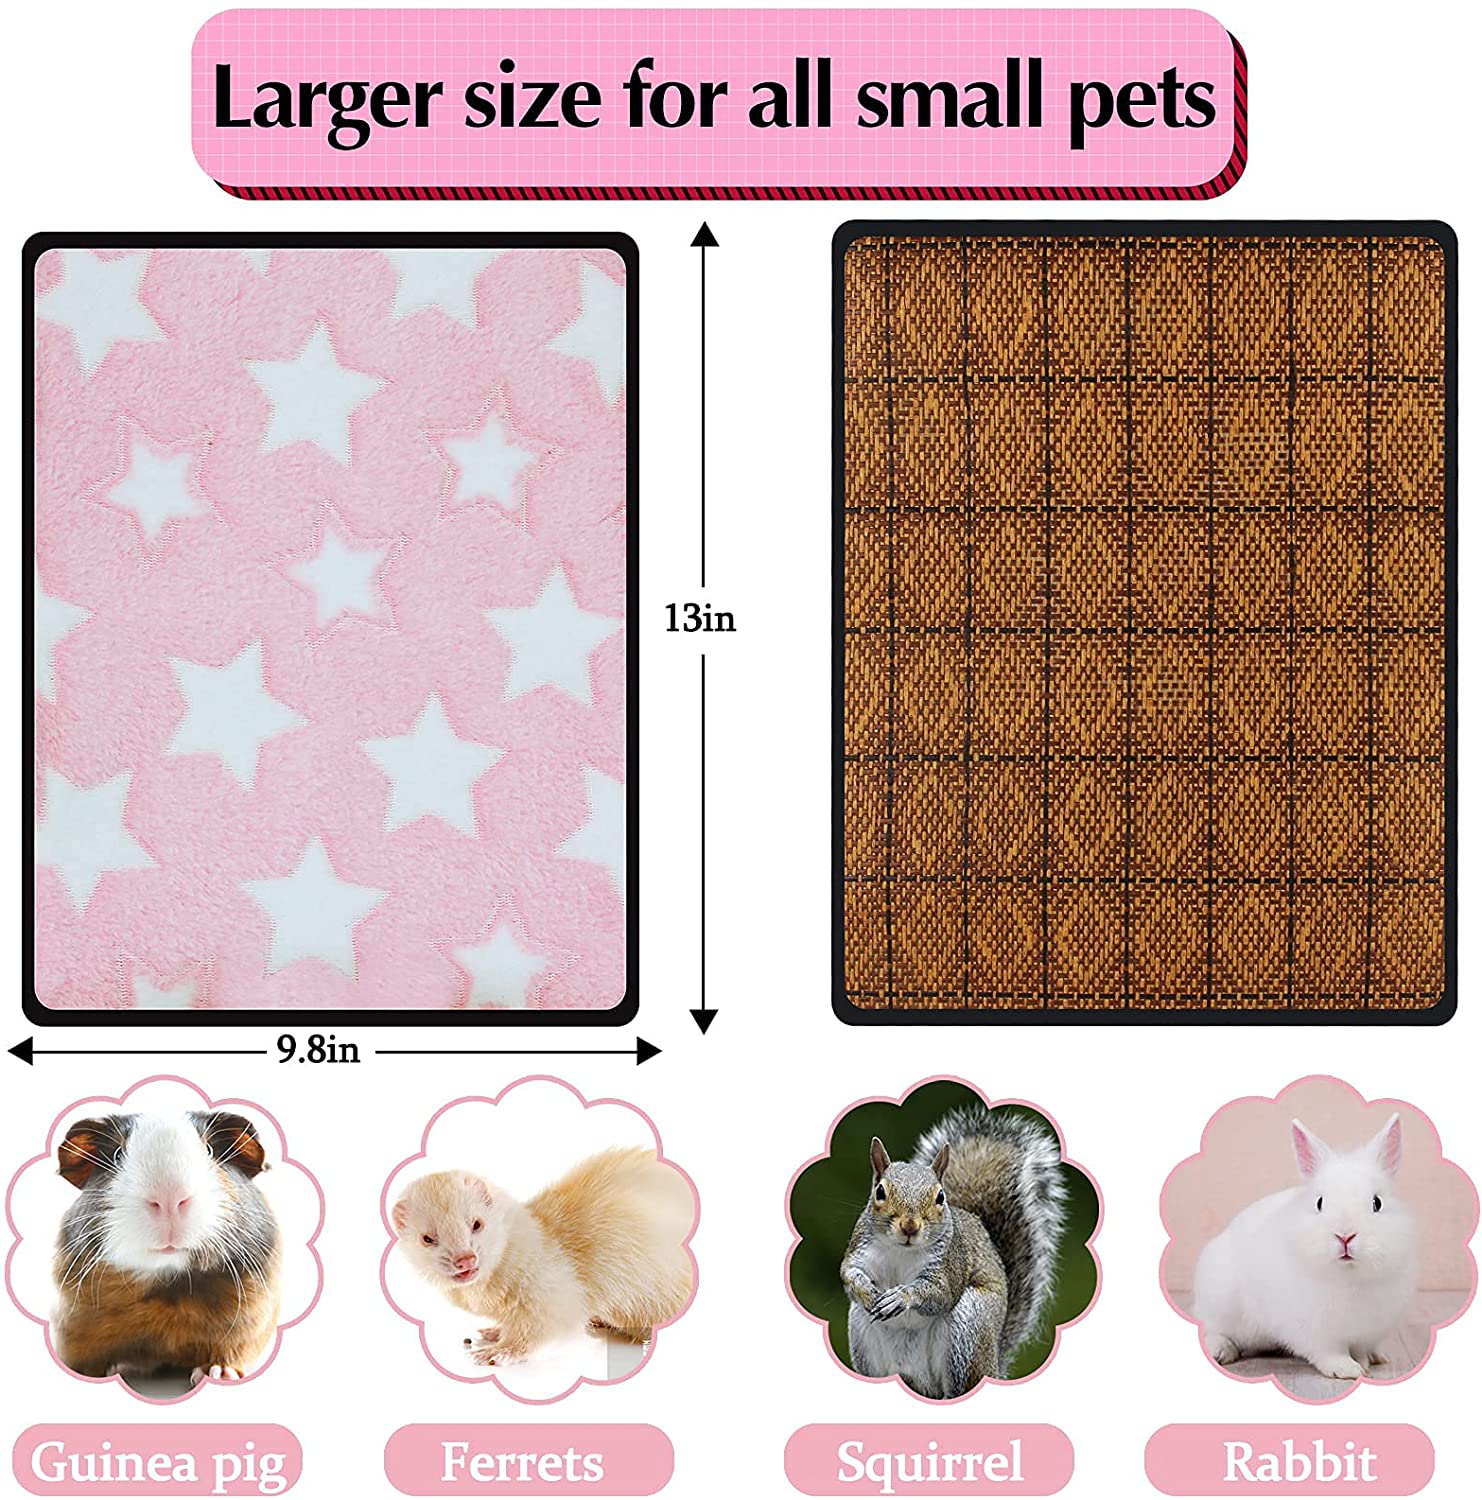 JCOLUSHI 3 Pieces of Hamster Bunny Guinea Pig Mat Cool in Summer and Warm in Winter,Guinea Pig Bed Hamster House Hamster Bunny Bed Guinea Pig Hideout Accessories Small Animal Bed Bunny Toys